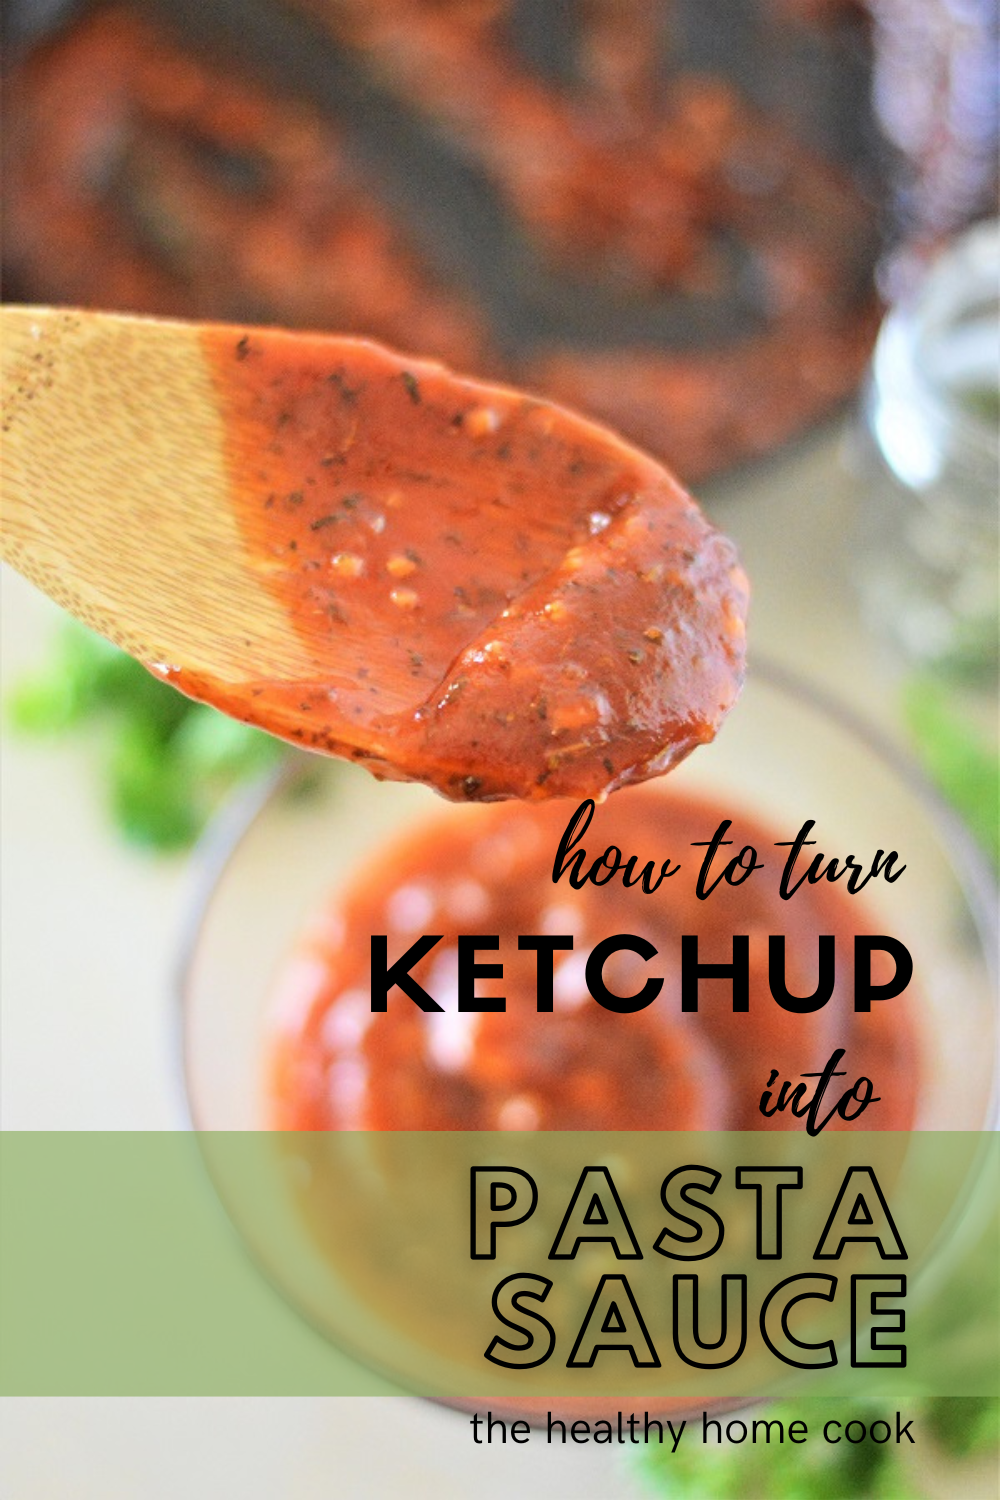 How to turn Ketchup into Pasta Sauce - The Healthy Home Cook